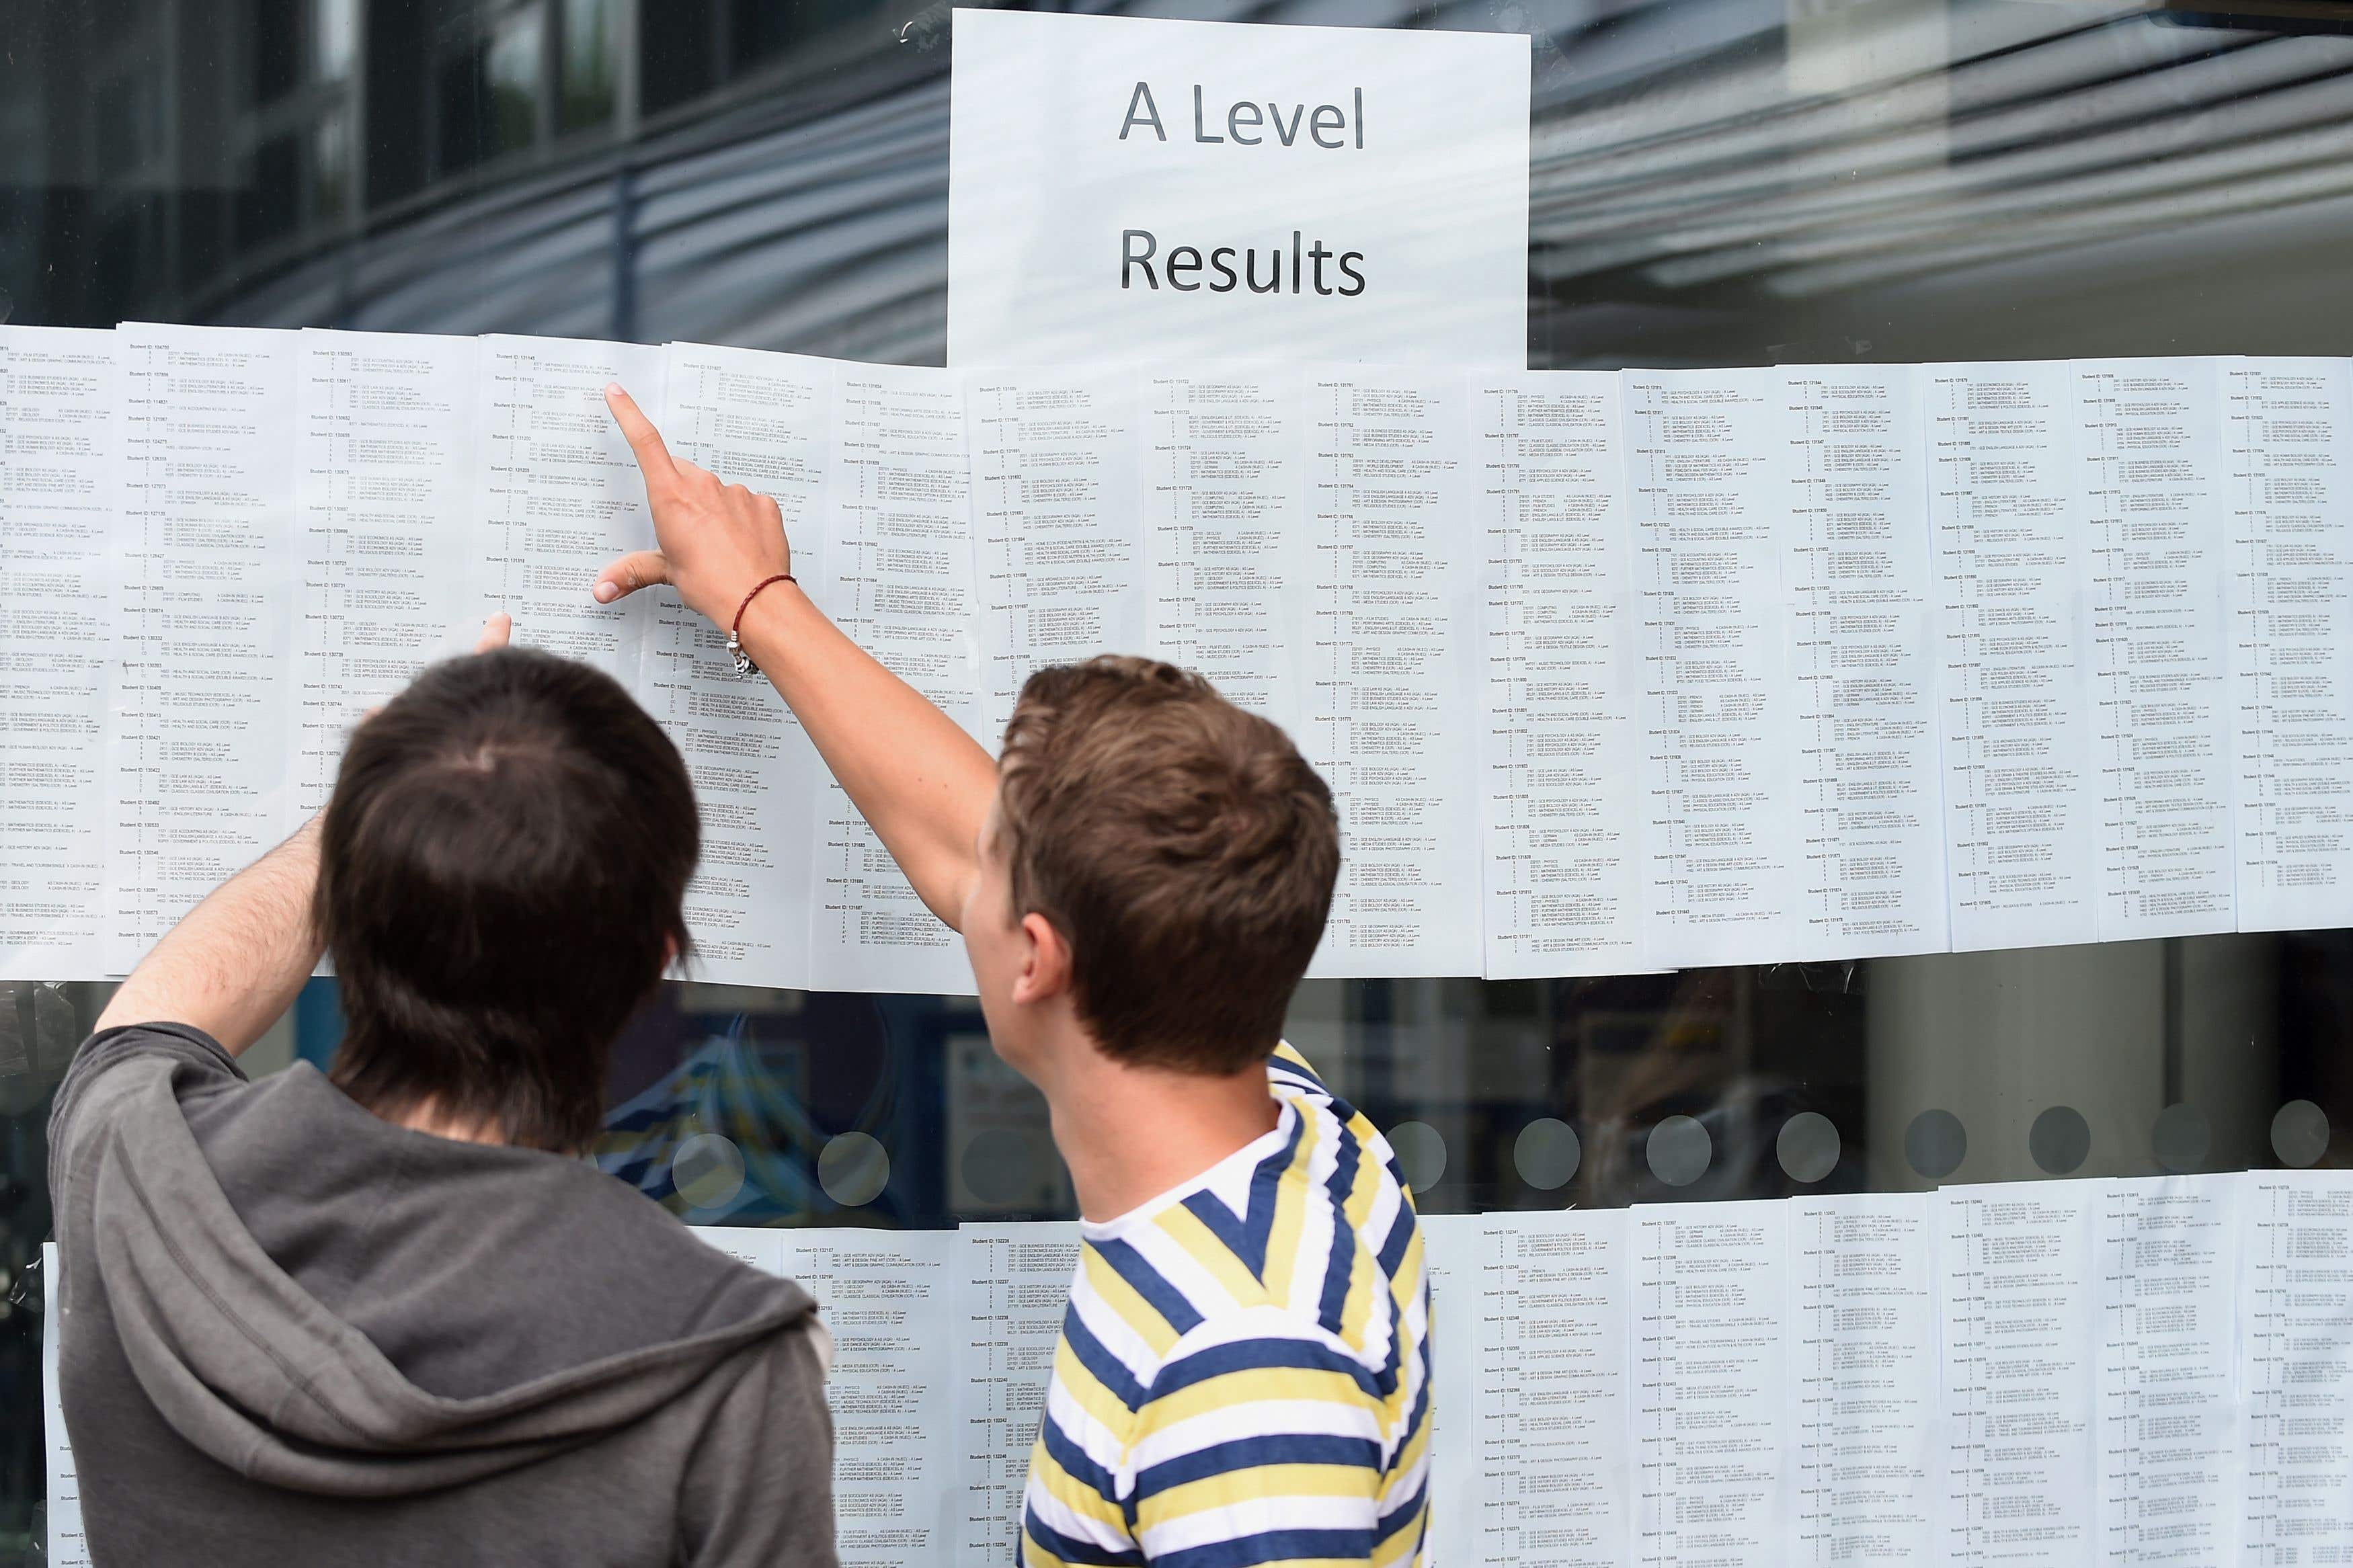 The head of Ucas has warned A Level students to have a Plan B on results day as clearing becomes more competitive